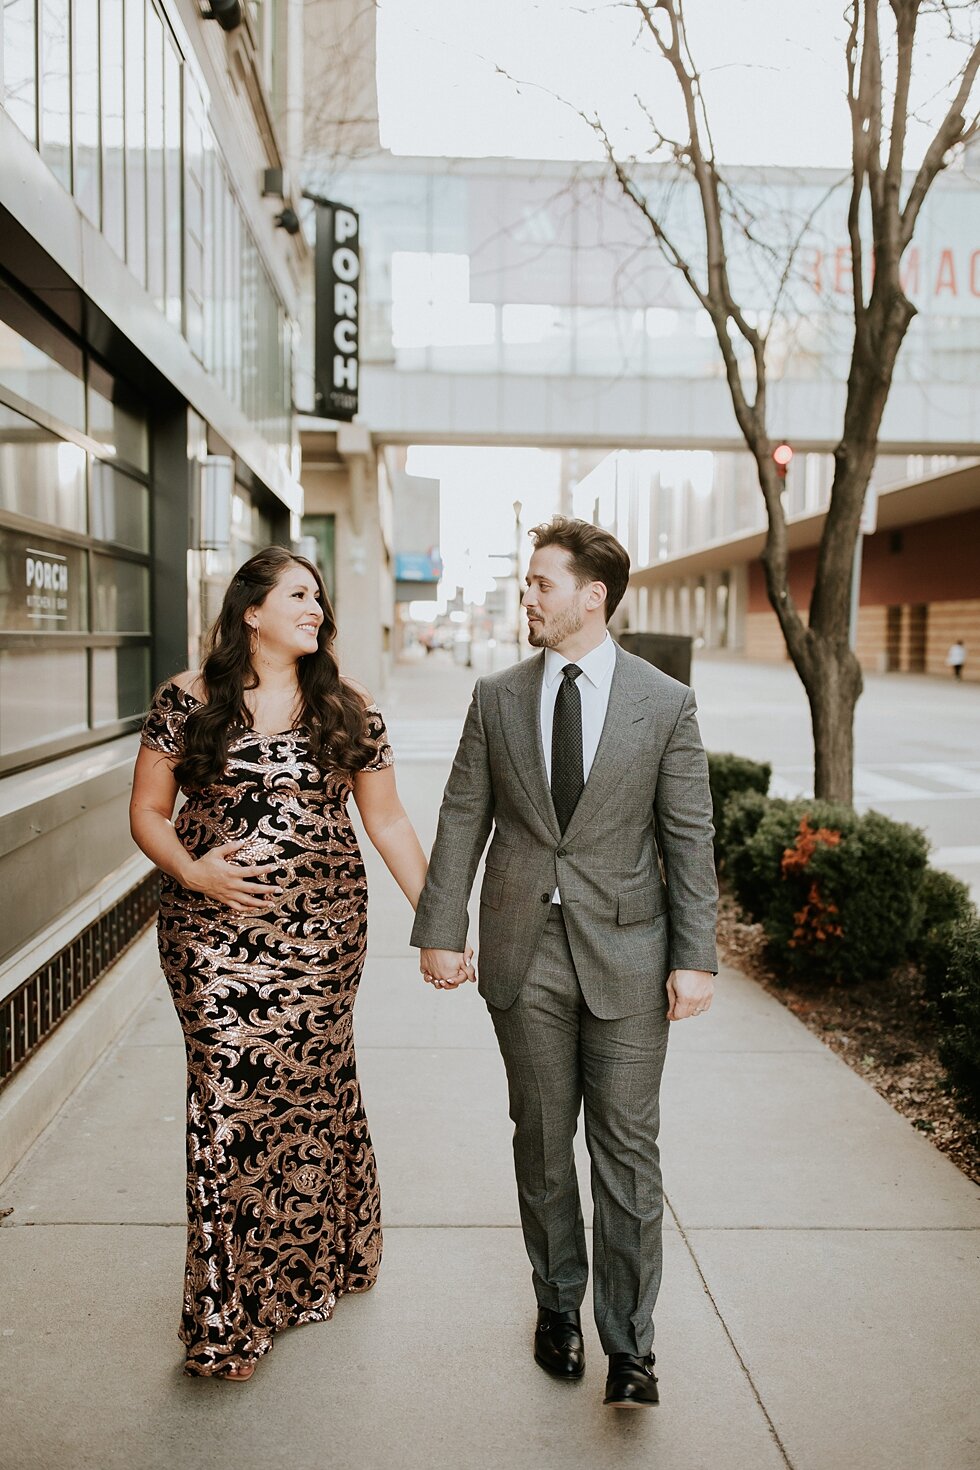  Walking side by side as this mother and father to be prepare for big changes ahead in absolute style. #maternitygoals #maternityphotographer #babybump #kentuckyphotographer #fancymaternitysession #modernmaternitysession #urbanmaternitysession #dress